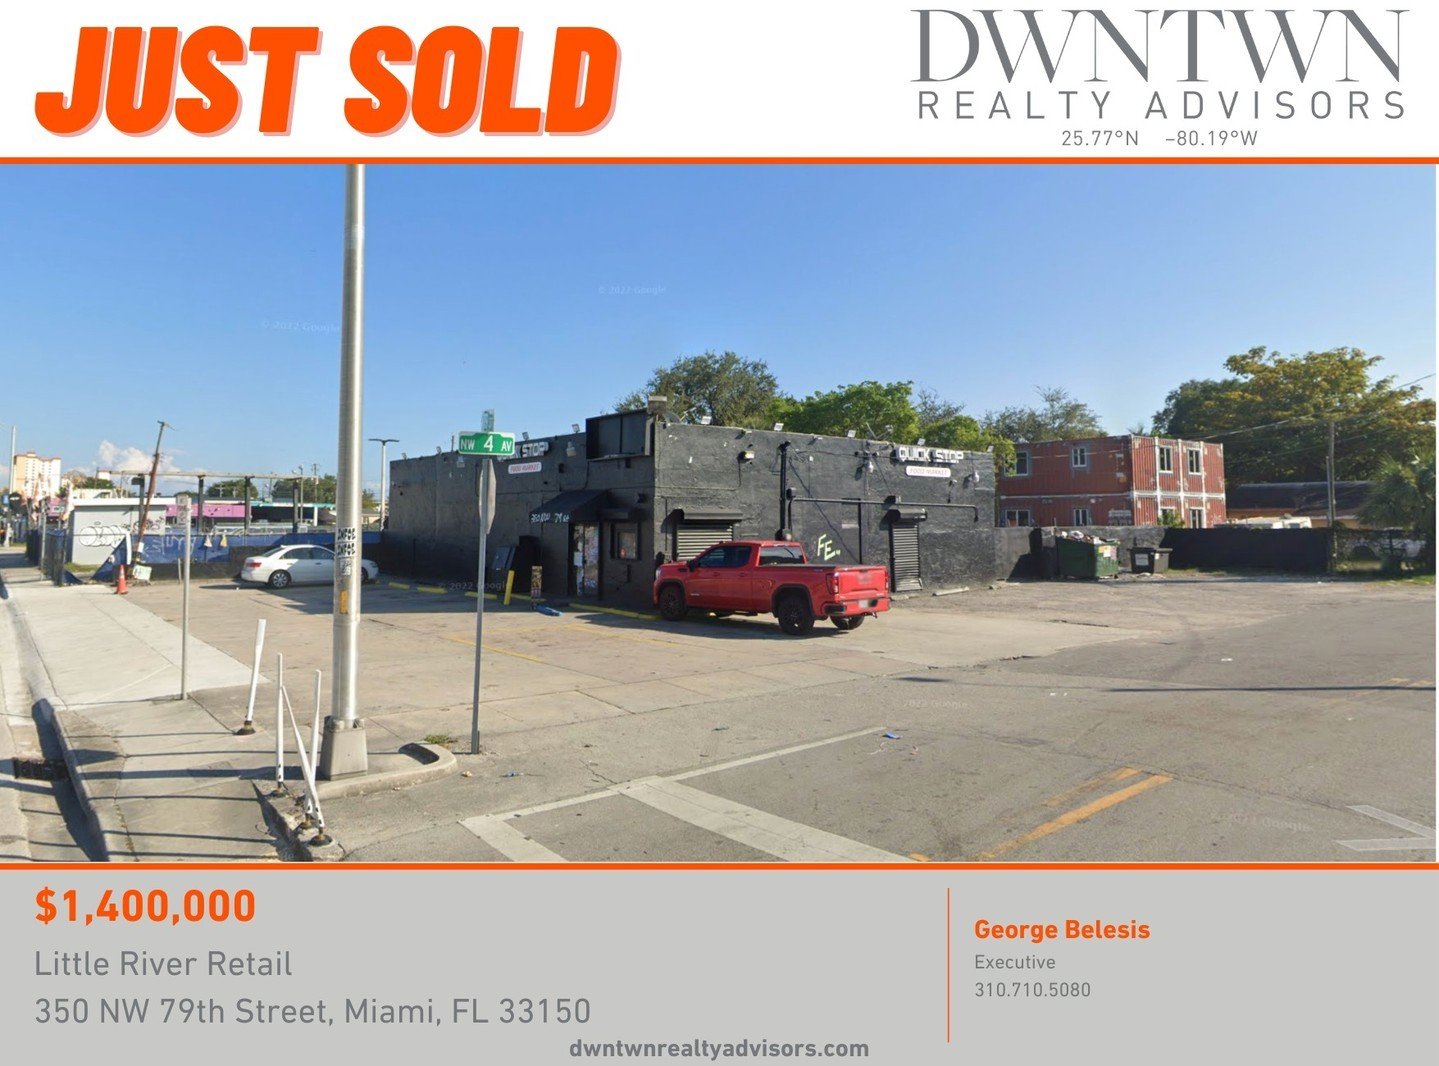 JUST SOLD | Little River Retail for $1,400,000

DWNTWN Realty Advisors is pleased to announce the sale of 350 NW 79th Street, a 2,192 SF retail shop on a 13,000 SF lot, located in Little River.

George Belesis represented both sides of the transactio